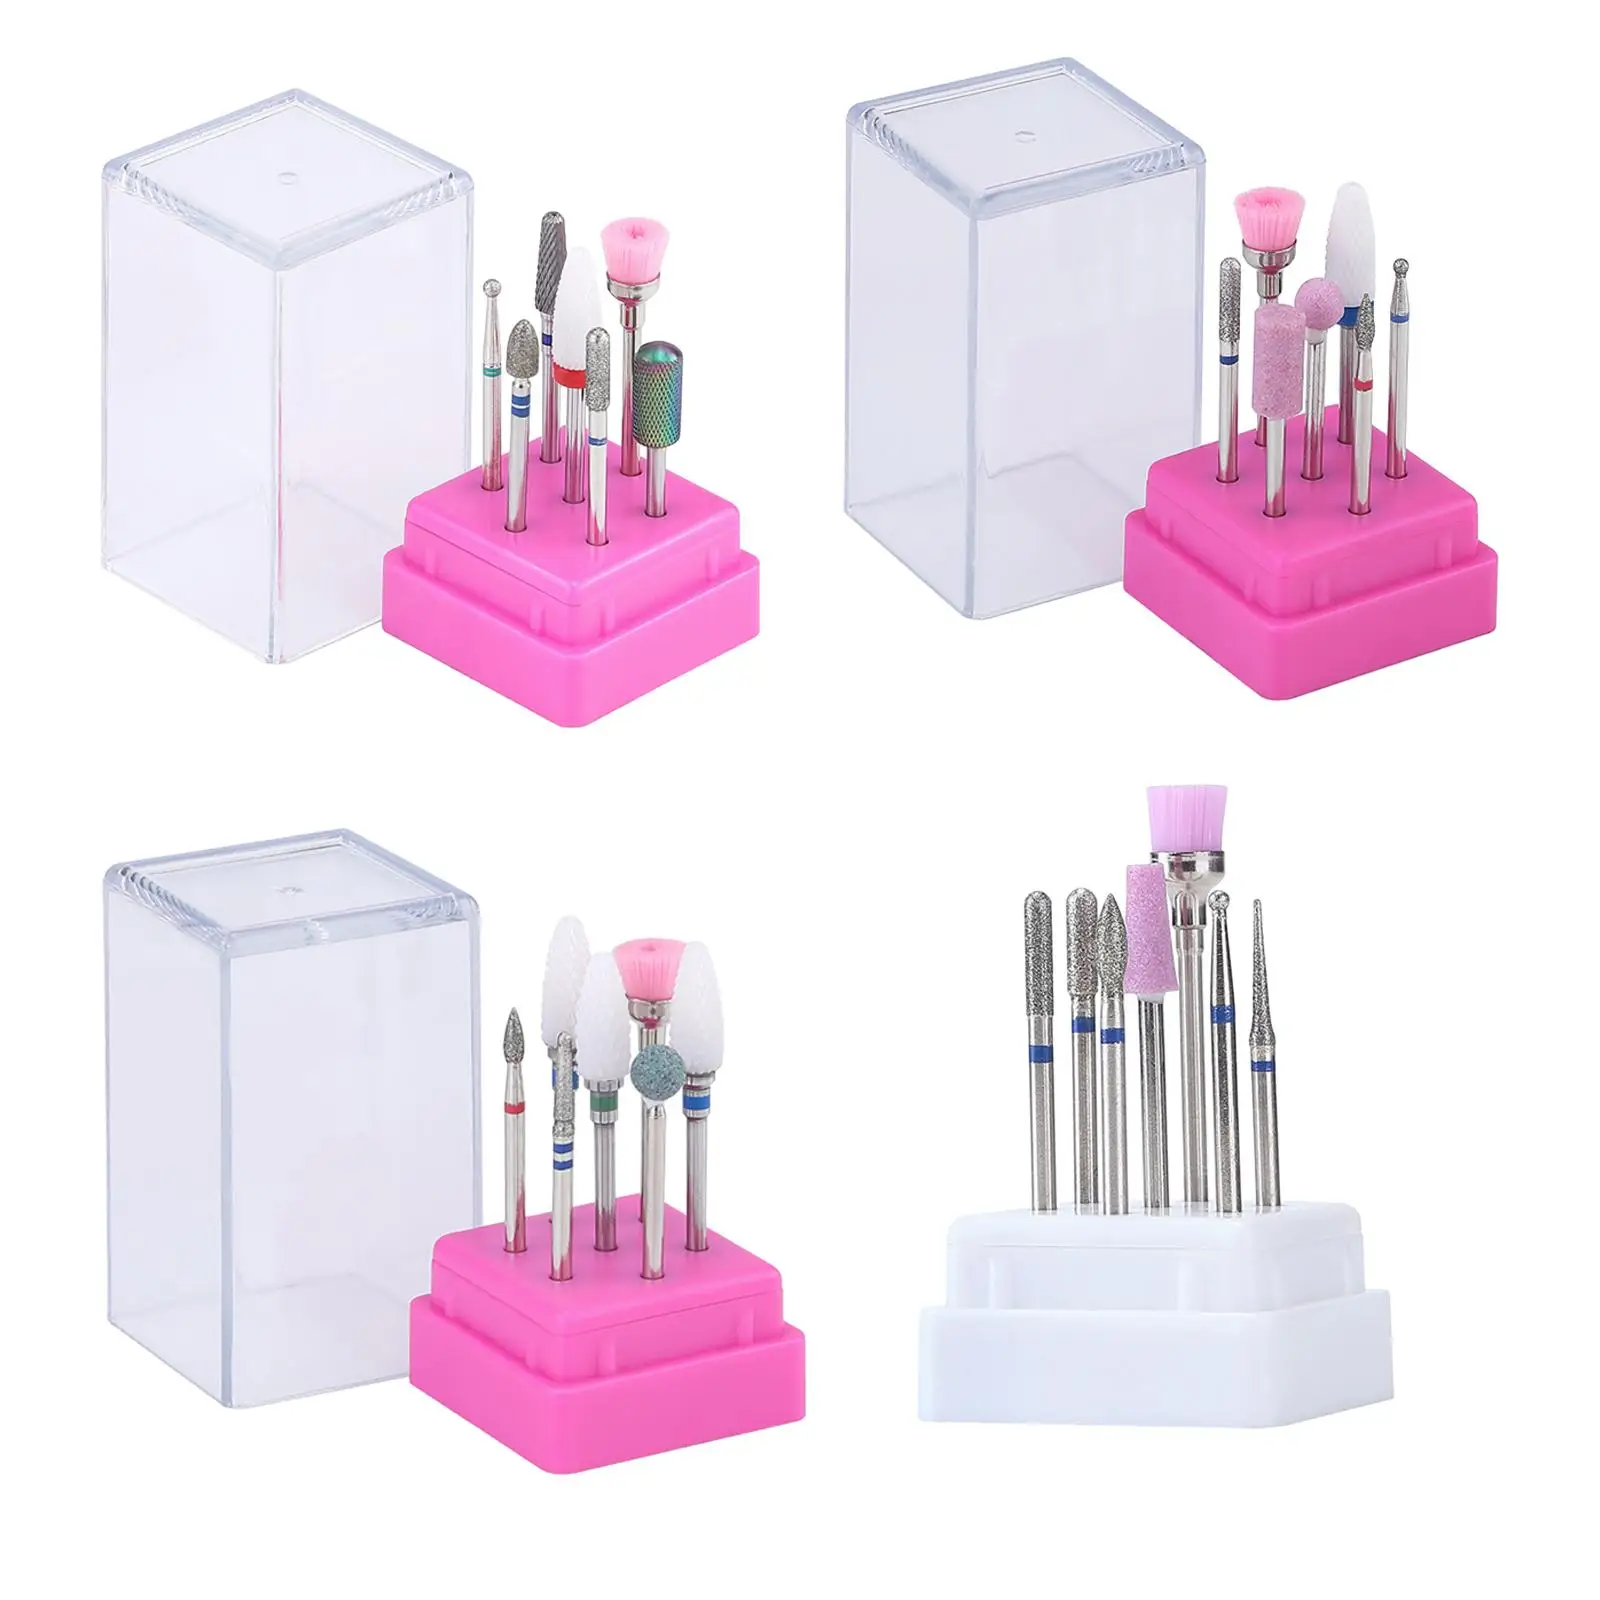 Electric Nail Drill Bits Kit with Holder Box Polishing File Grinding Heads for Pedicure Manicure Remove Dead Skin Nail Schools